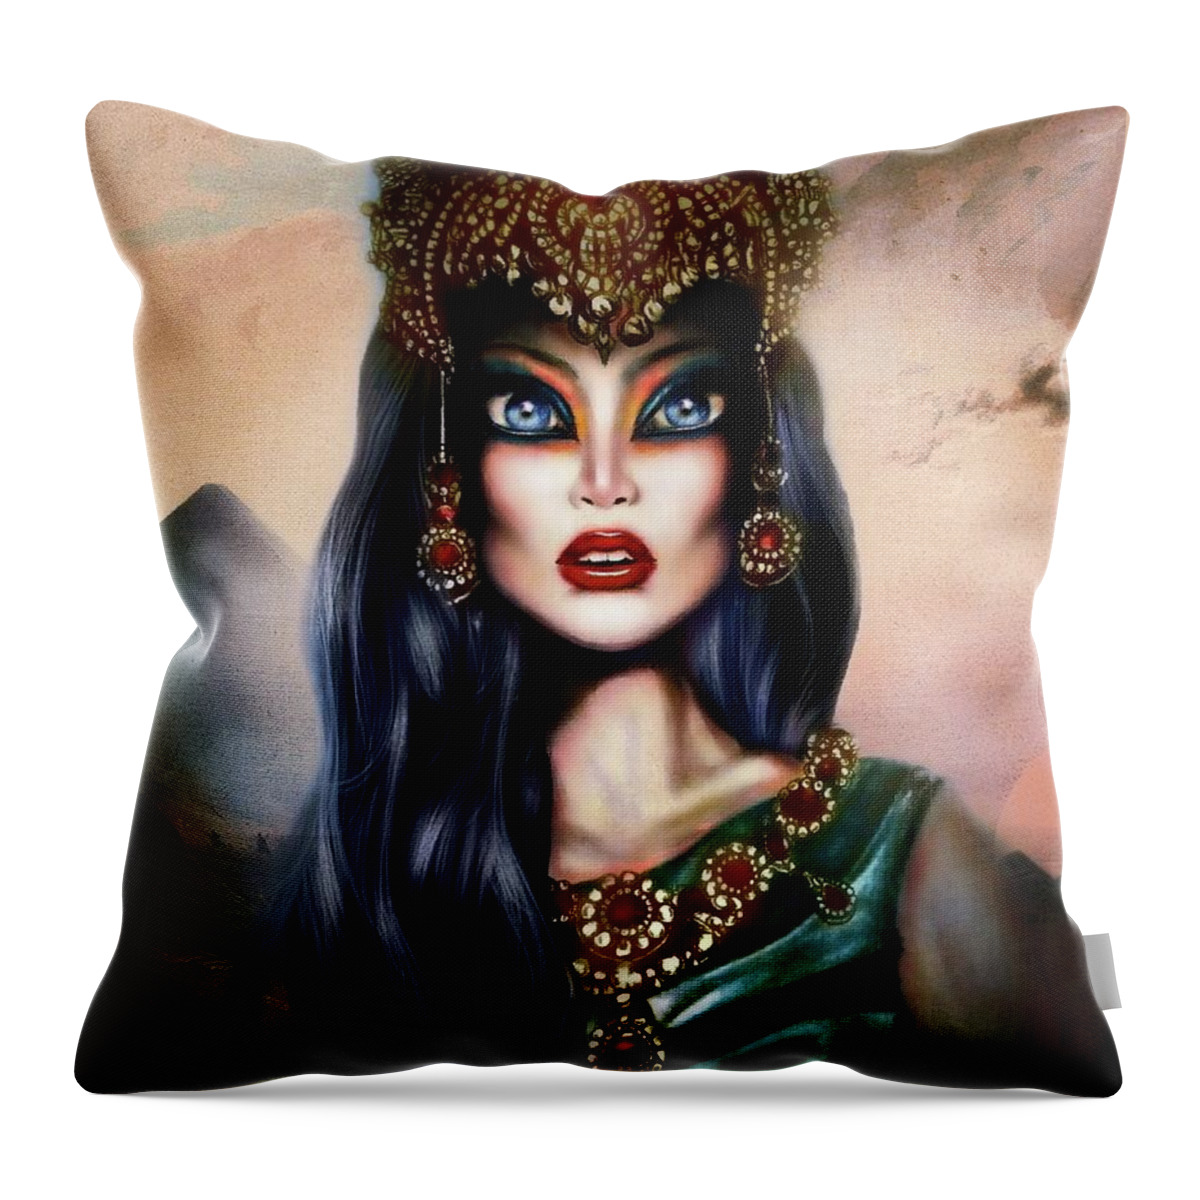 Blue Throw Pillow featuring the painting Hatshepsut Painting by Tiago Azevedo Pop Surrealism Art by Tiago Azevedo